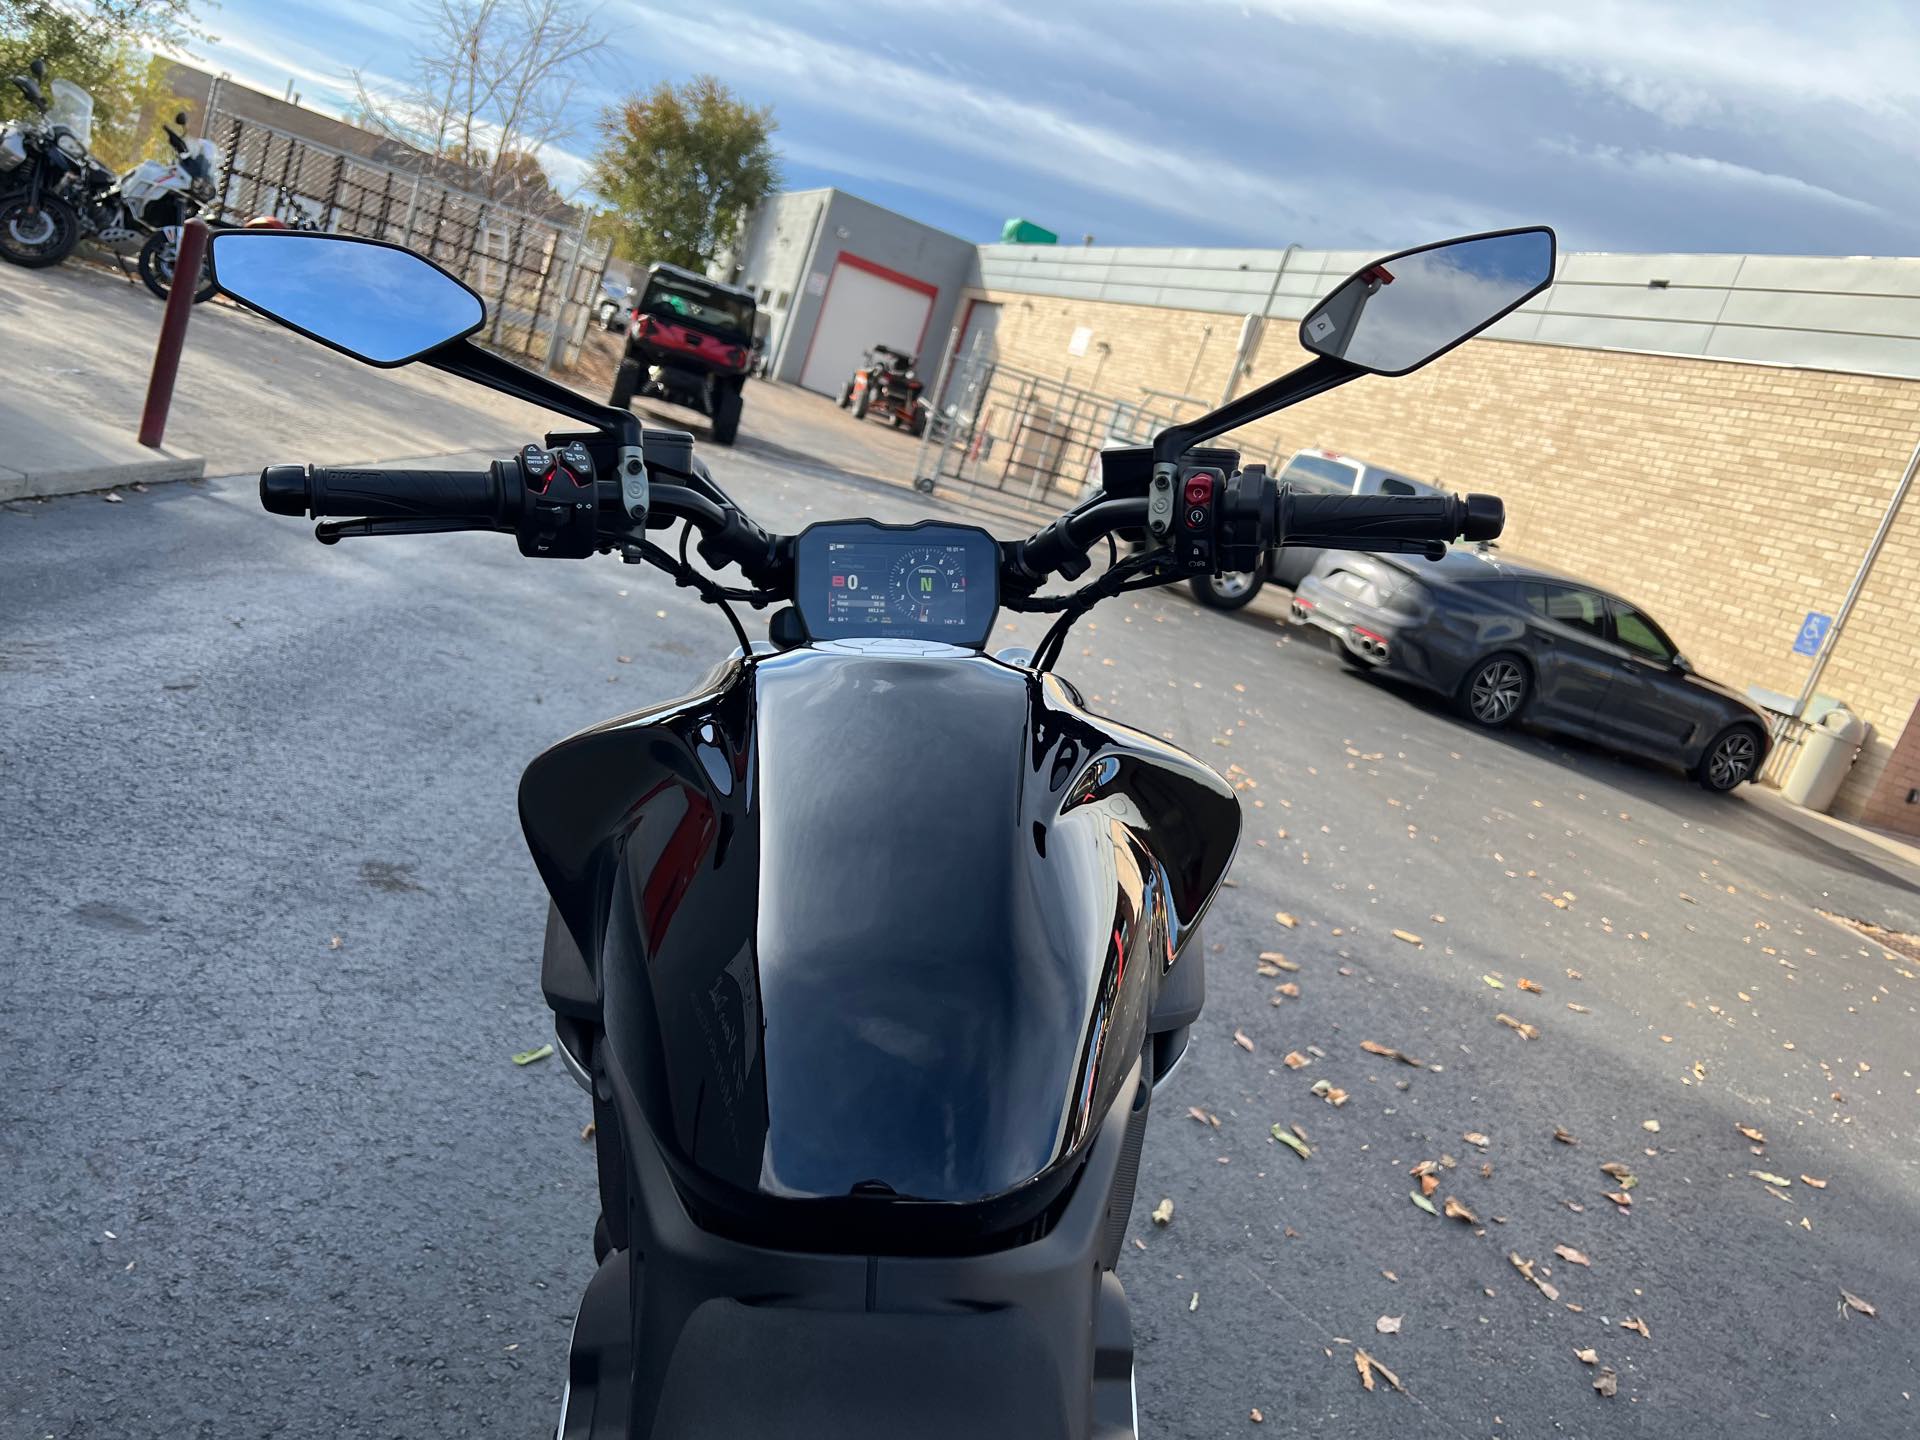 2023 Ducati Diavel V4 at Aces Motorcycles - Fort Collins